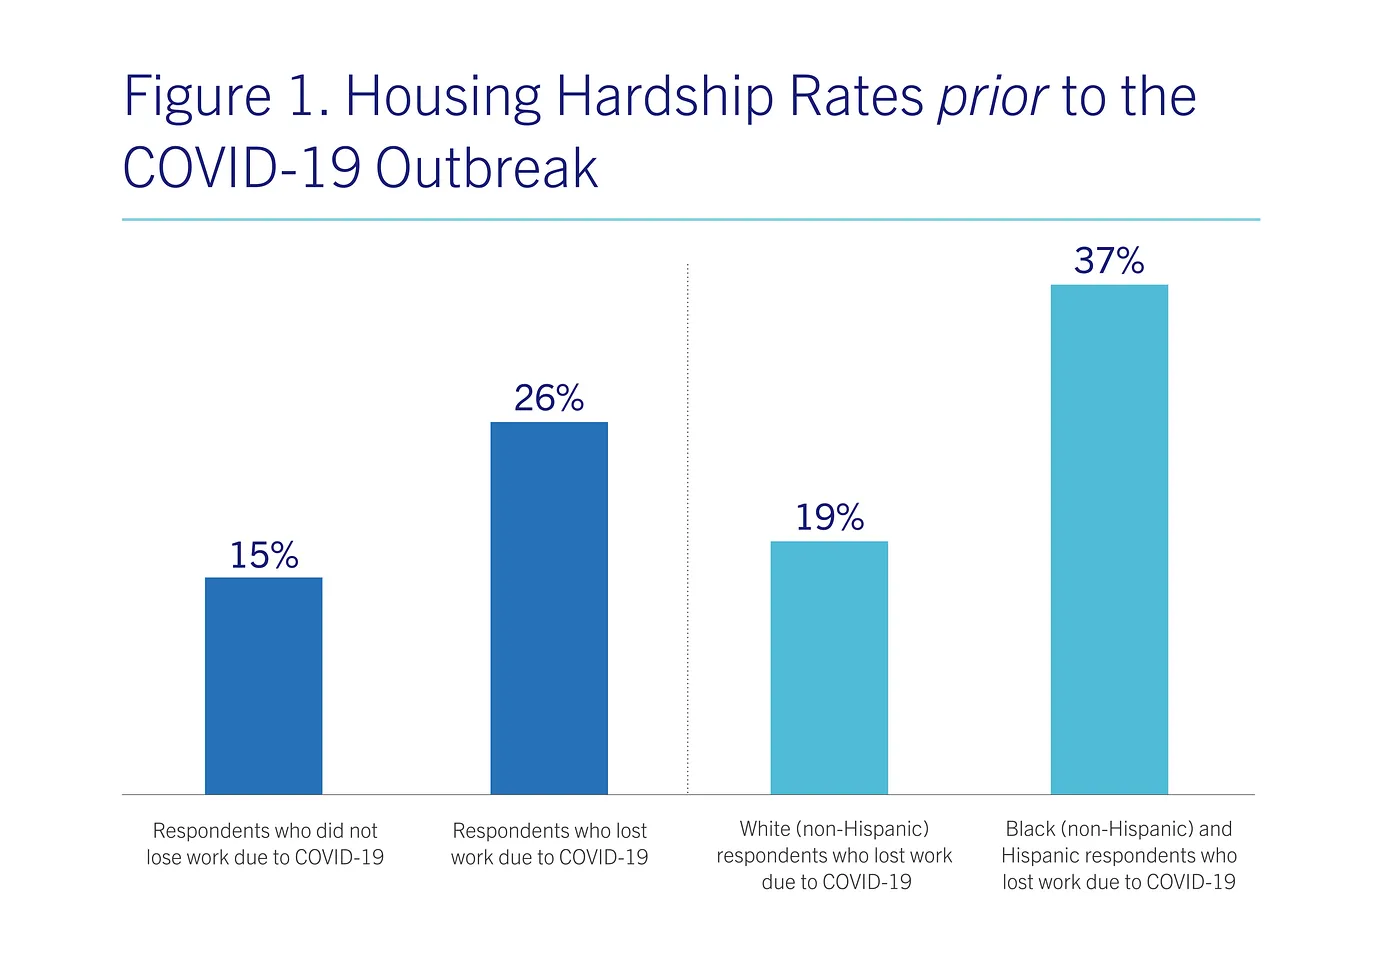 A chart that shows housing hardship rates prior to the COVID-19 outbreak